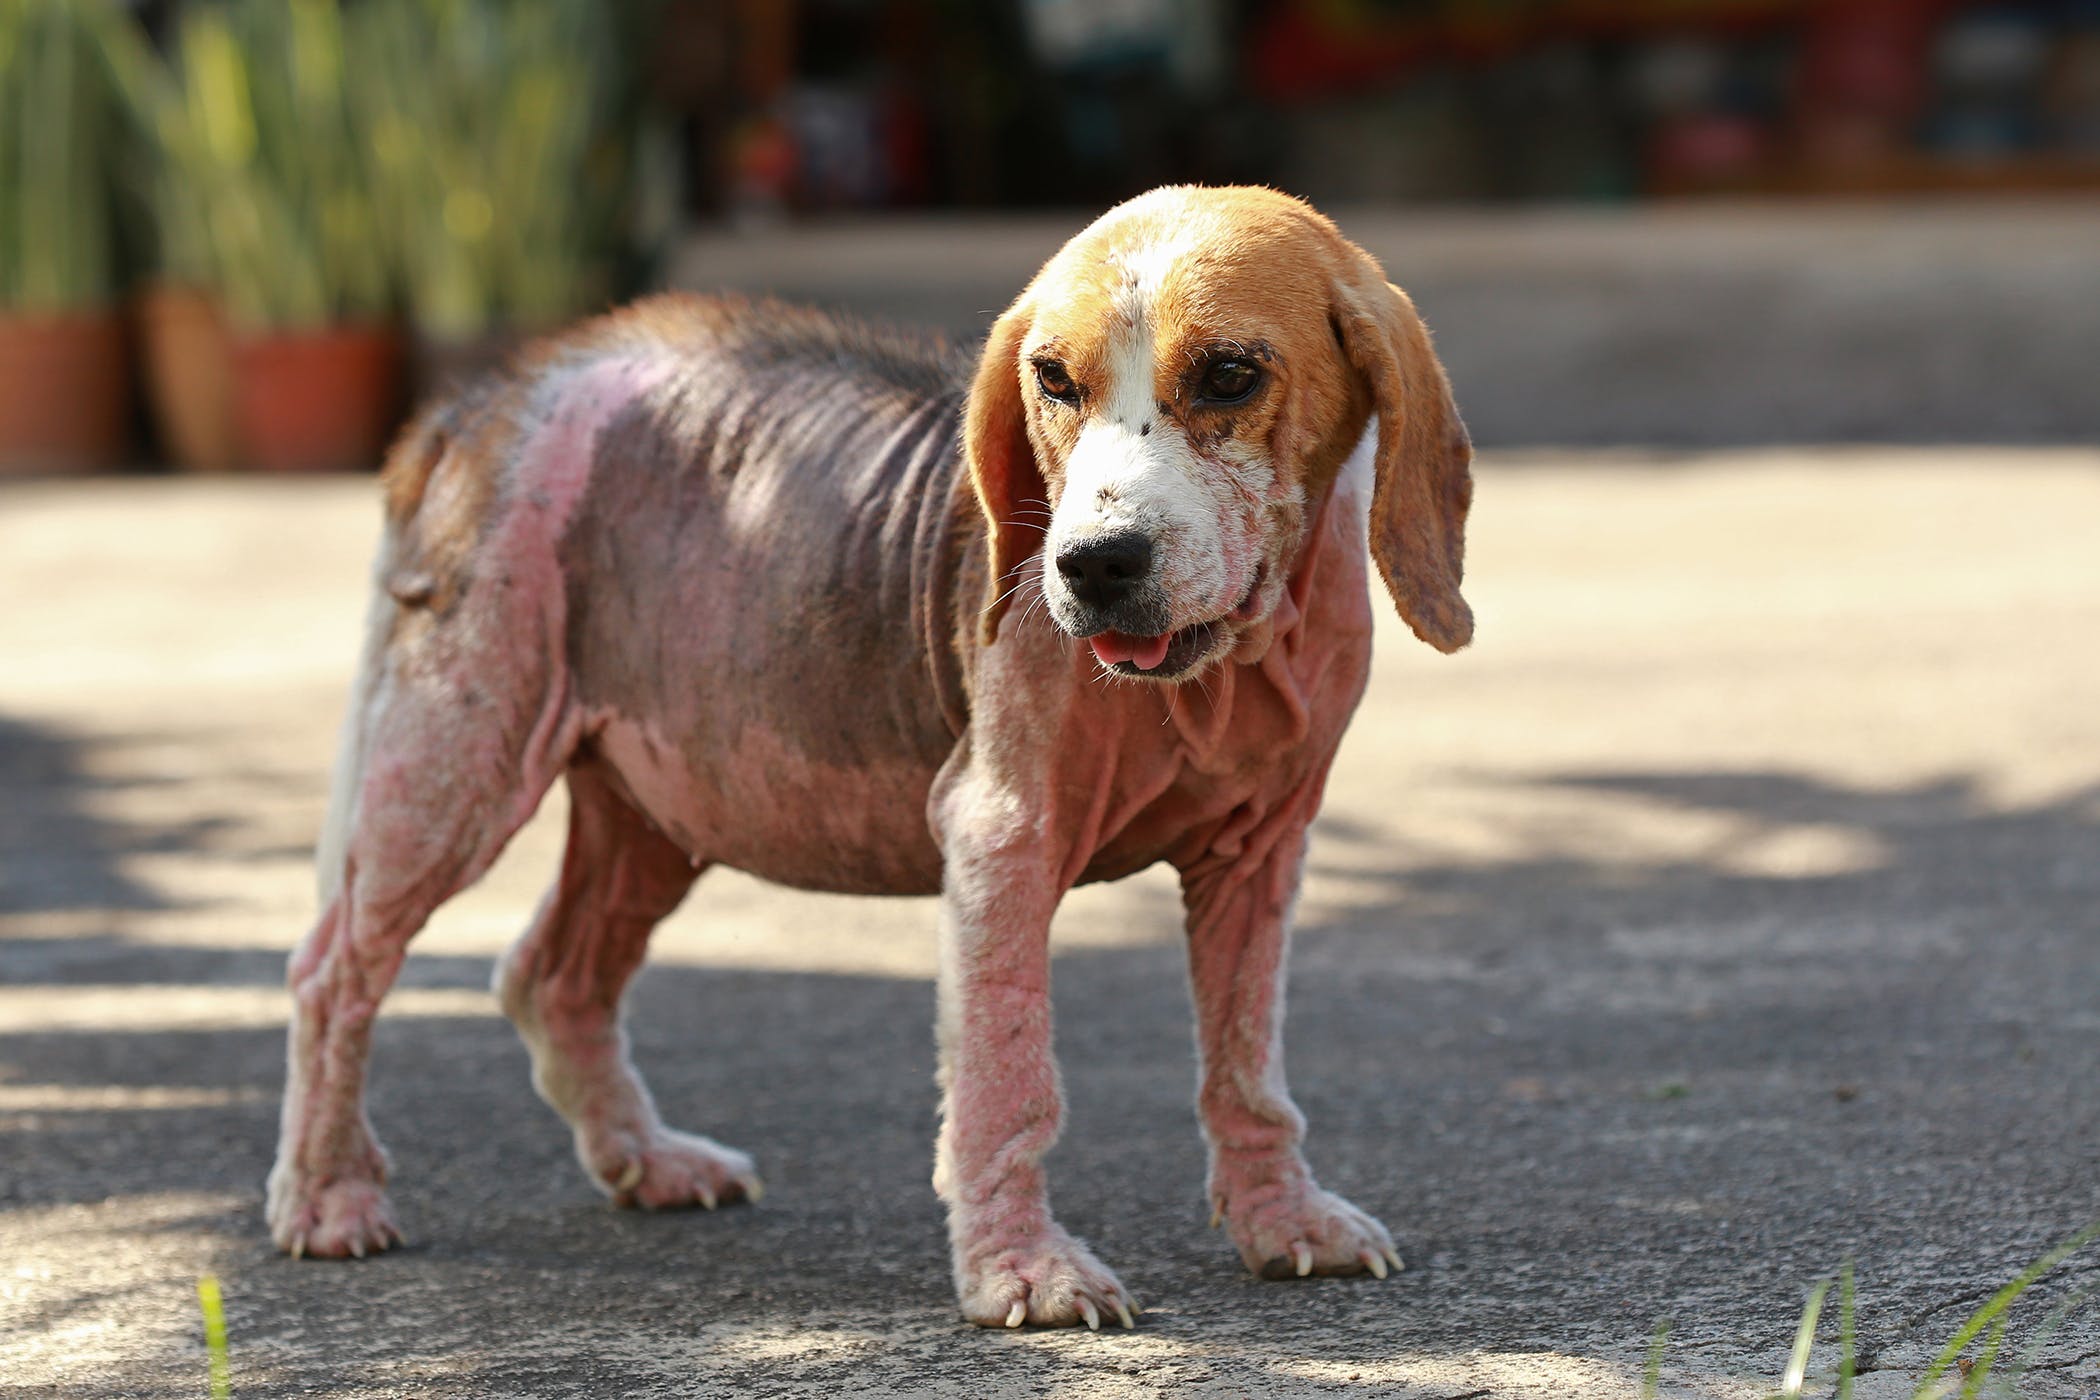 What causes dog pyoderma?